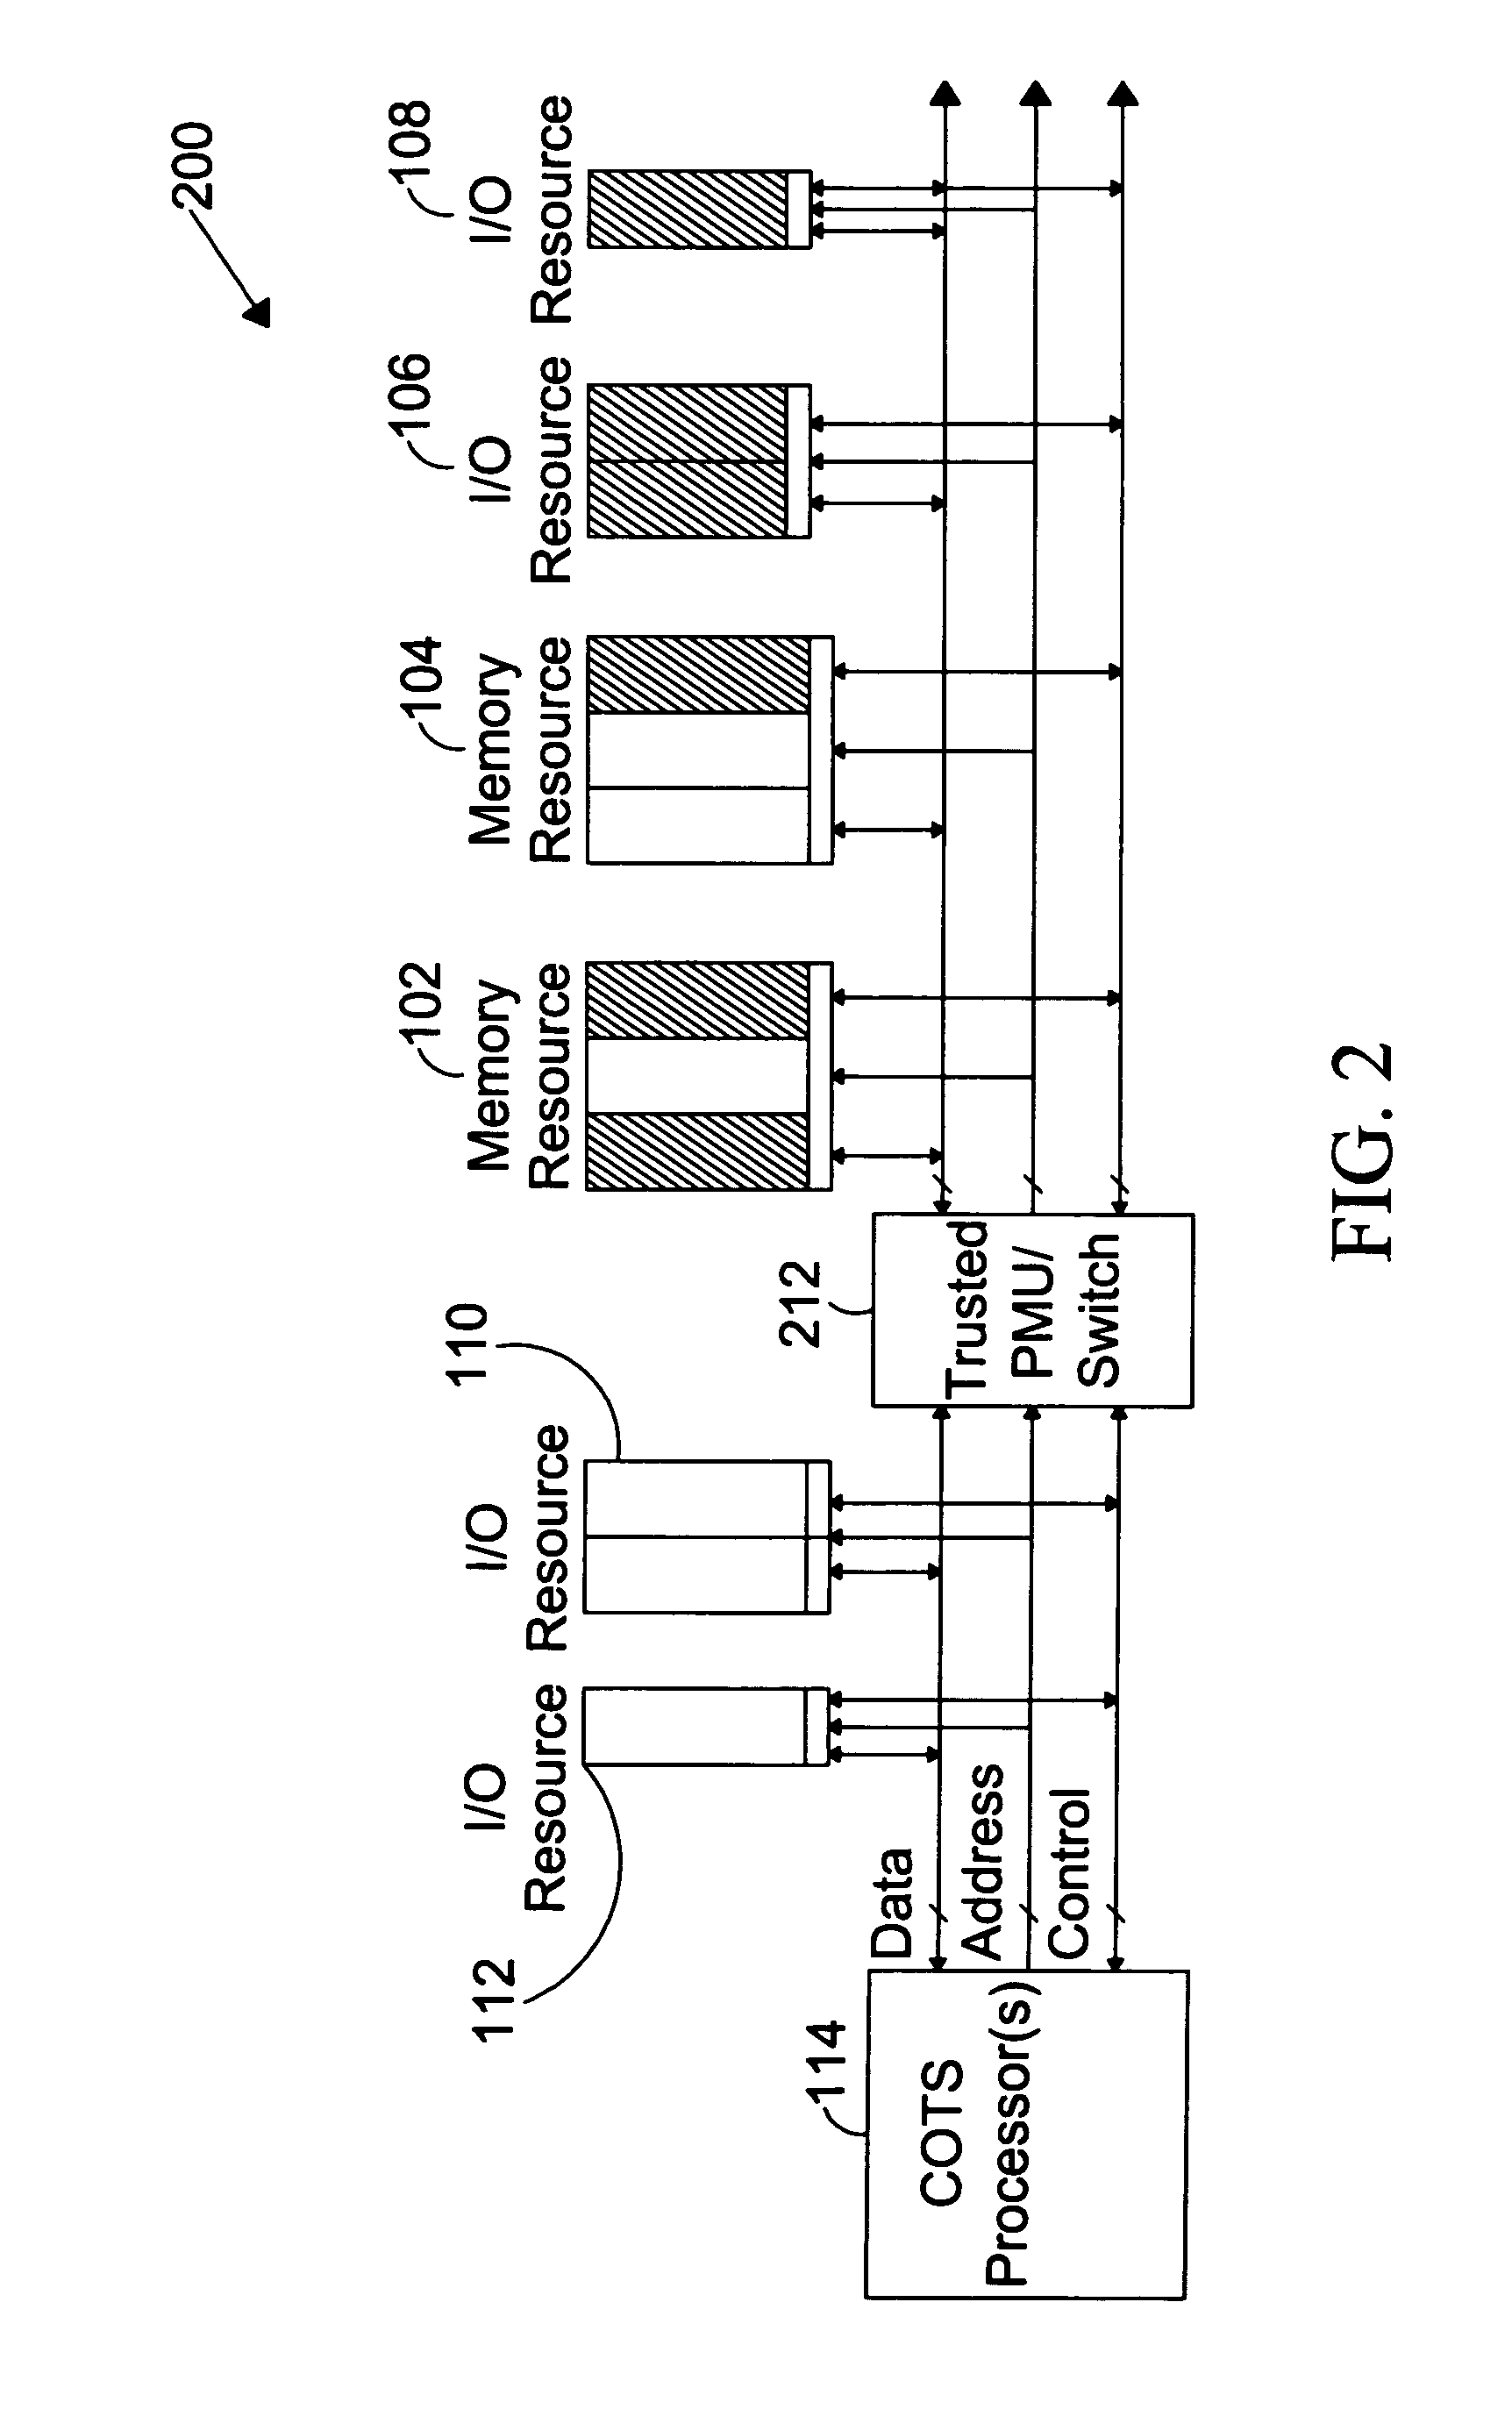 System for providing secure and trusted computing environments through a secure computing module